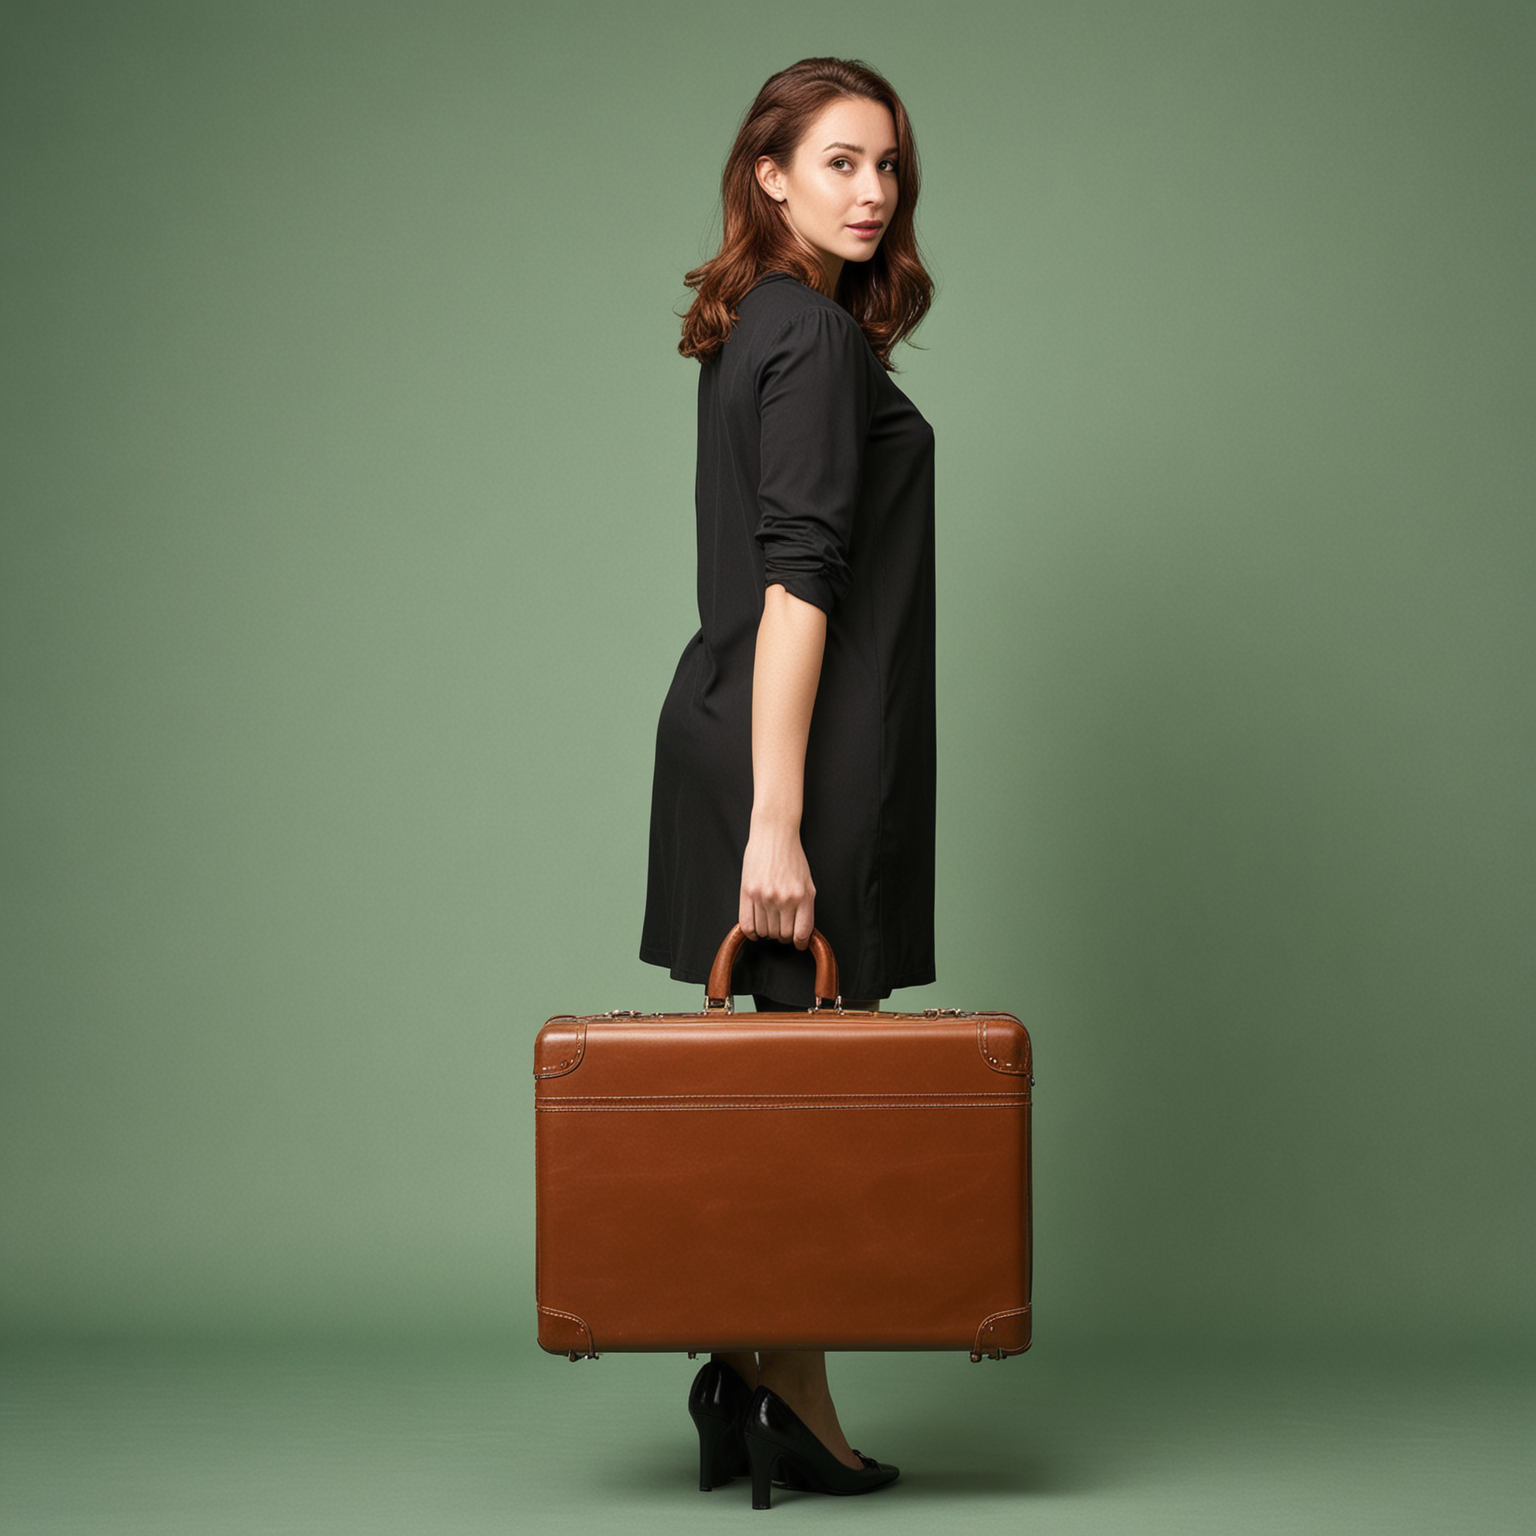 Vintage Woman Carrying Brown Suitcase on Green Background